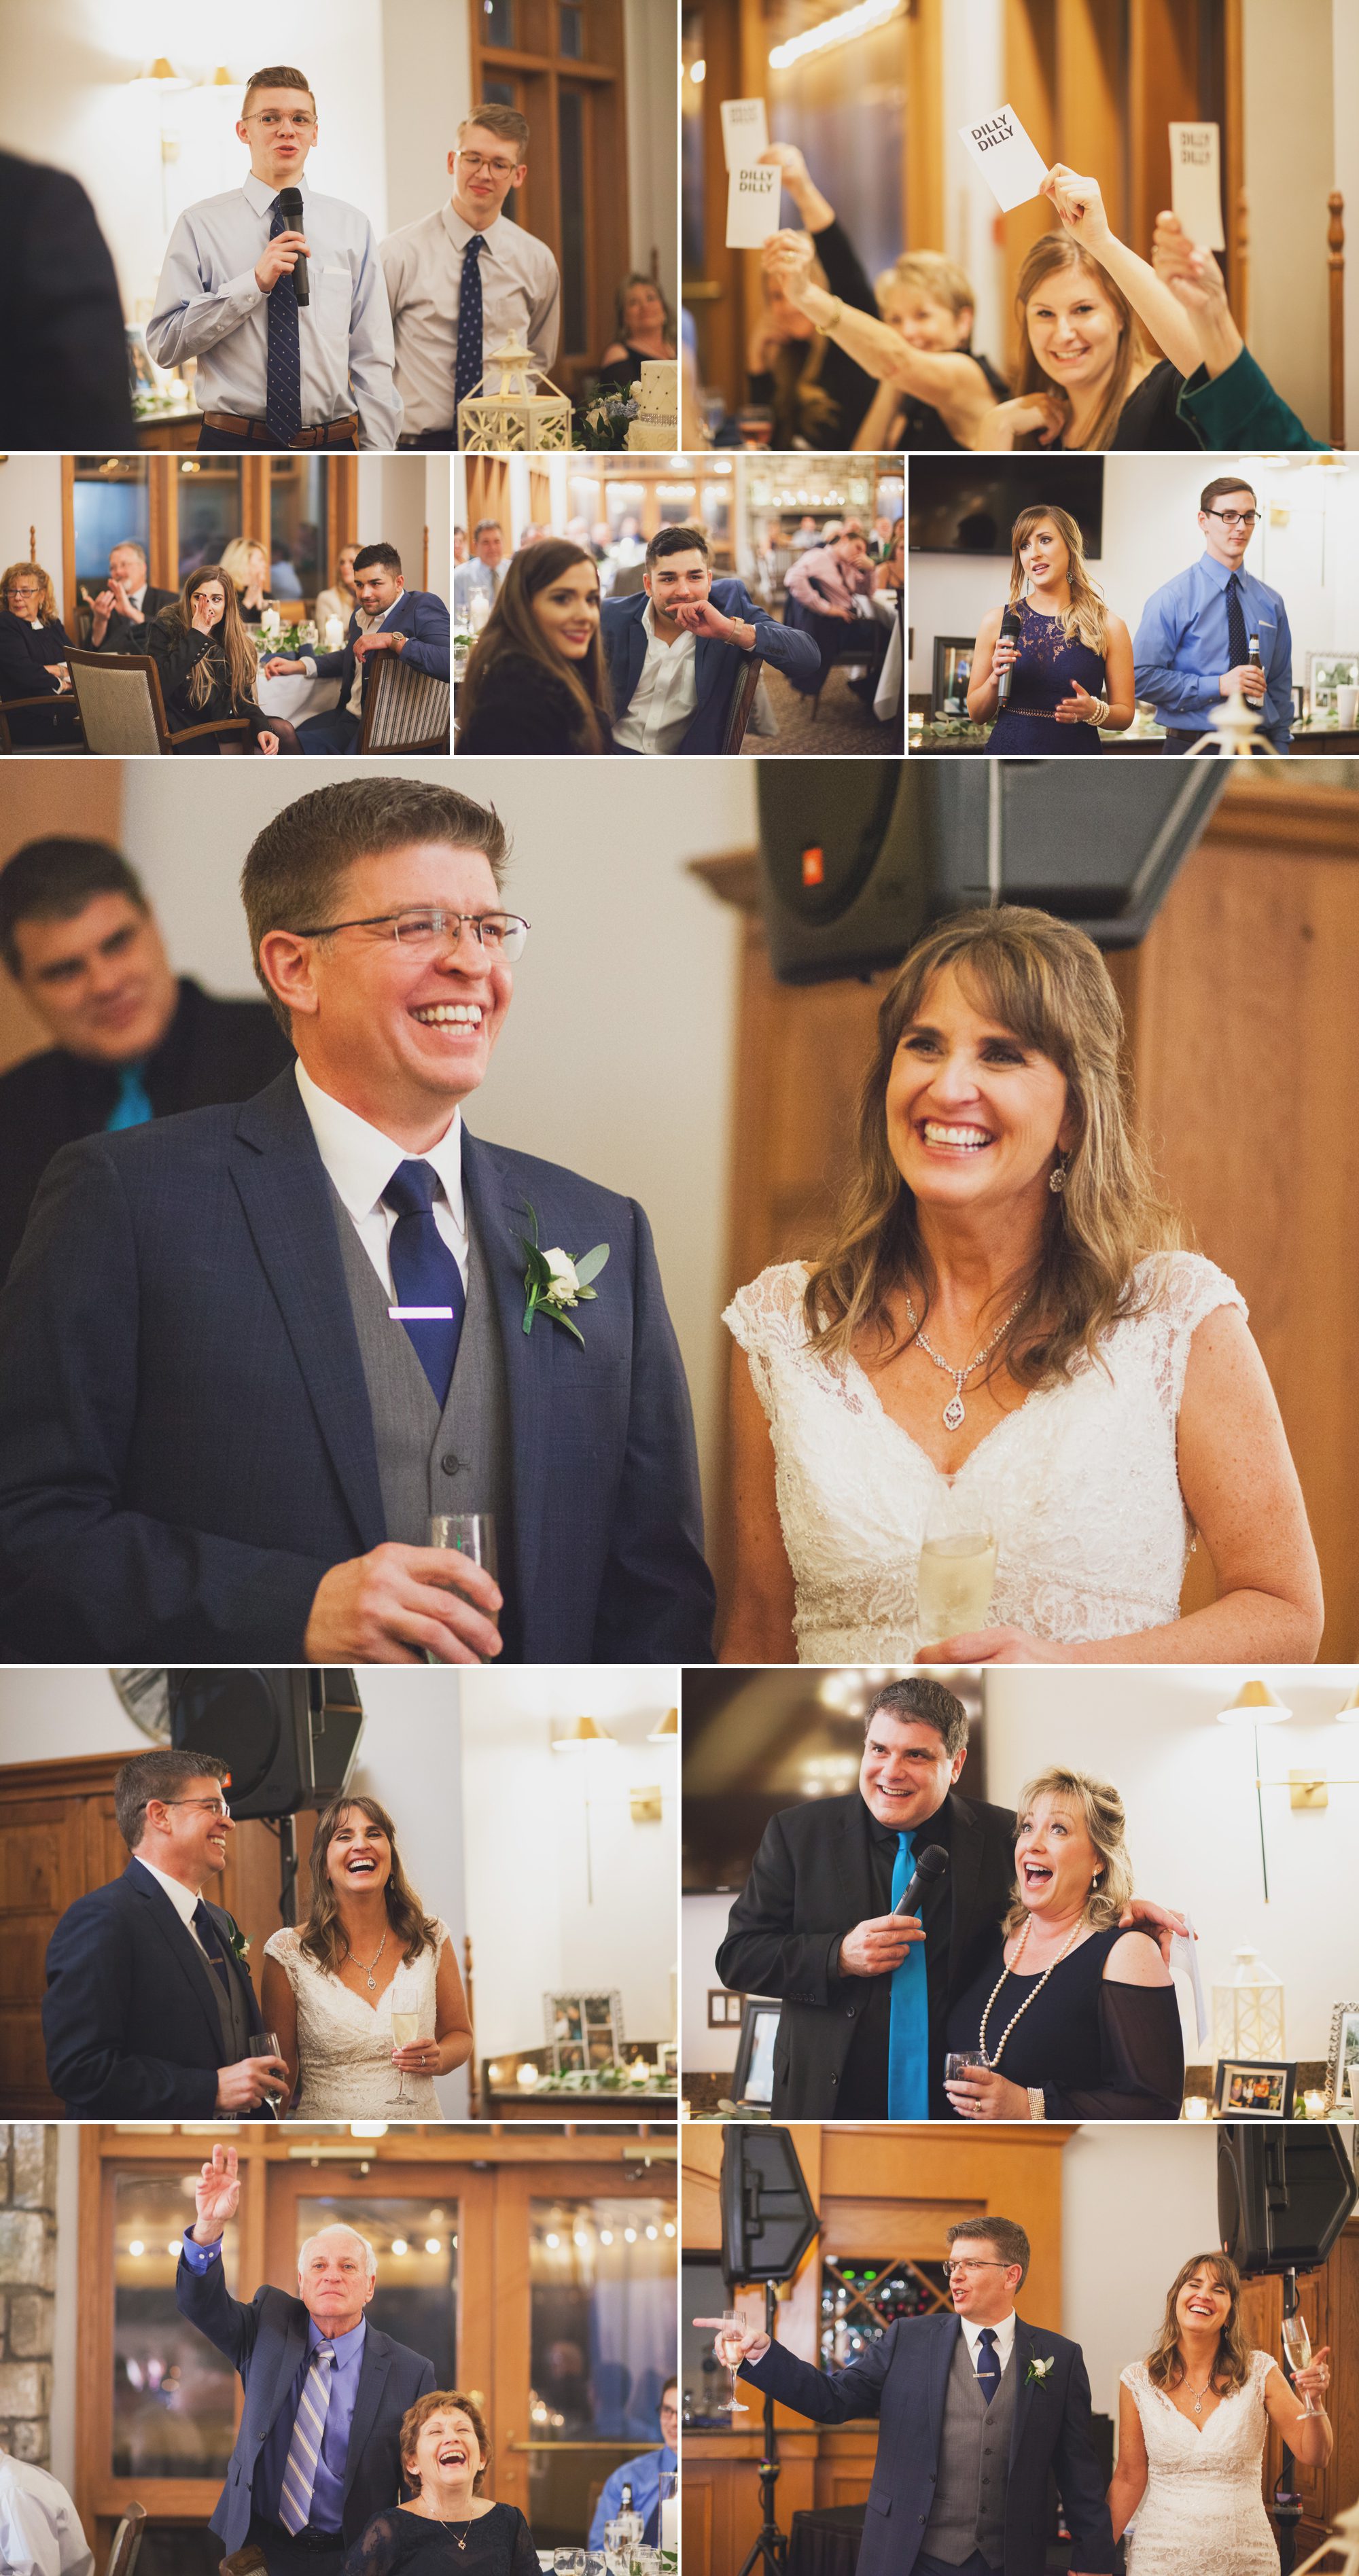 Wedding toasts after ceremony in clubhouse. Winter wedding at Vanderbilt Legends Golf Course in Brentwood TN, photos by Krista Lee Photography